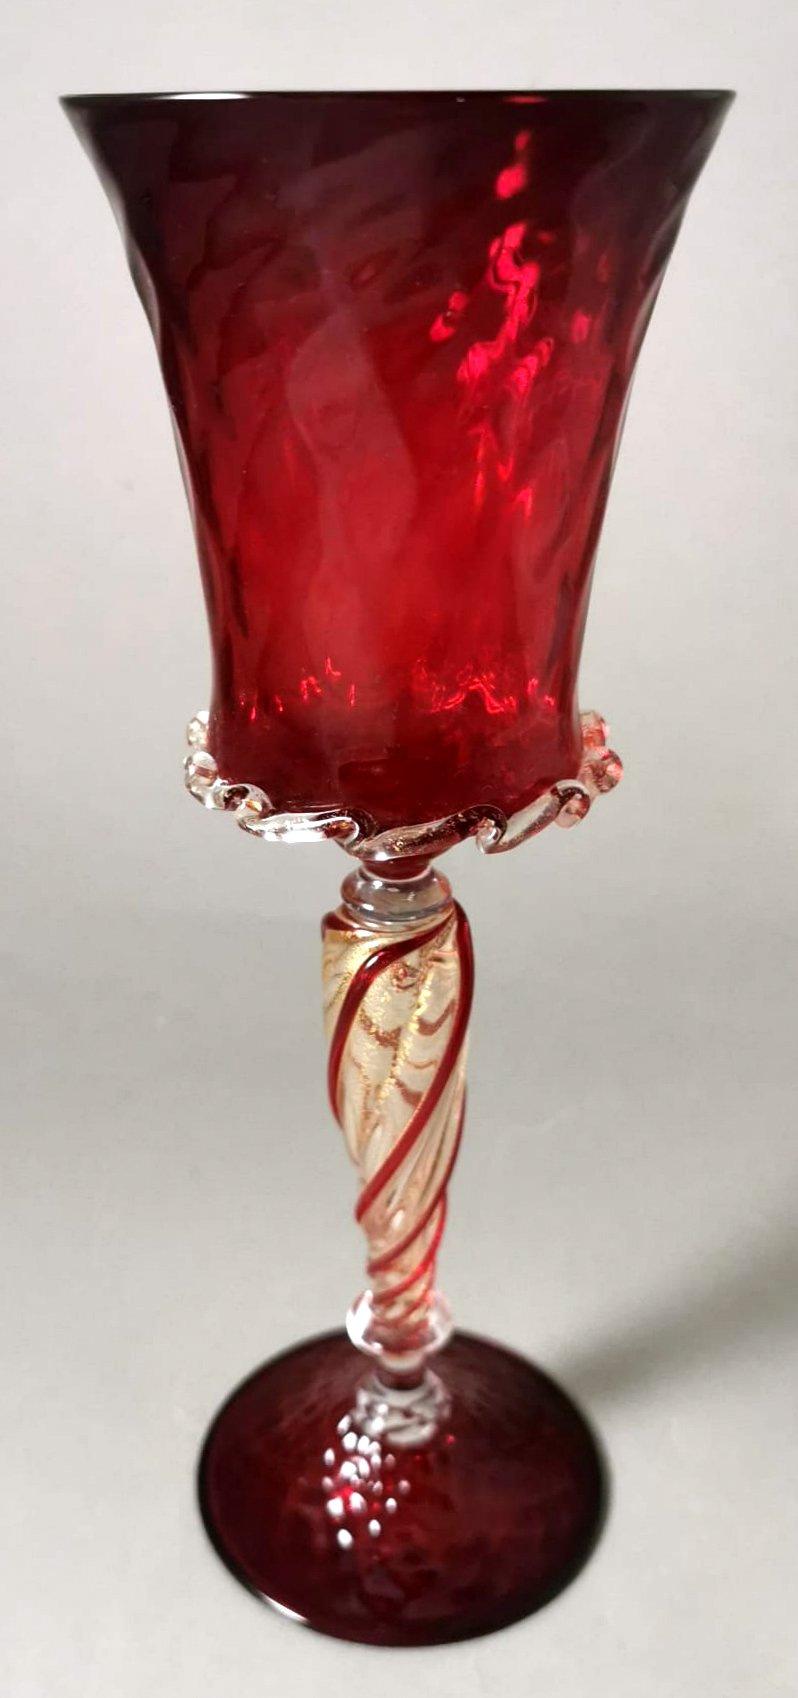 We kindly suggest that you read the entire description, as with it we try to give you detailed technical and historical information to guarantee the authenticity of our objects.
Exceptional hot-blown Murano glass goblet; it has a rare stem worked